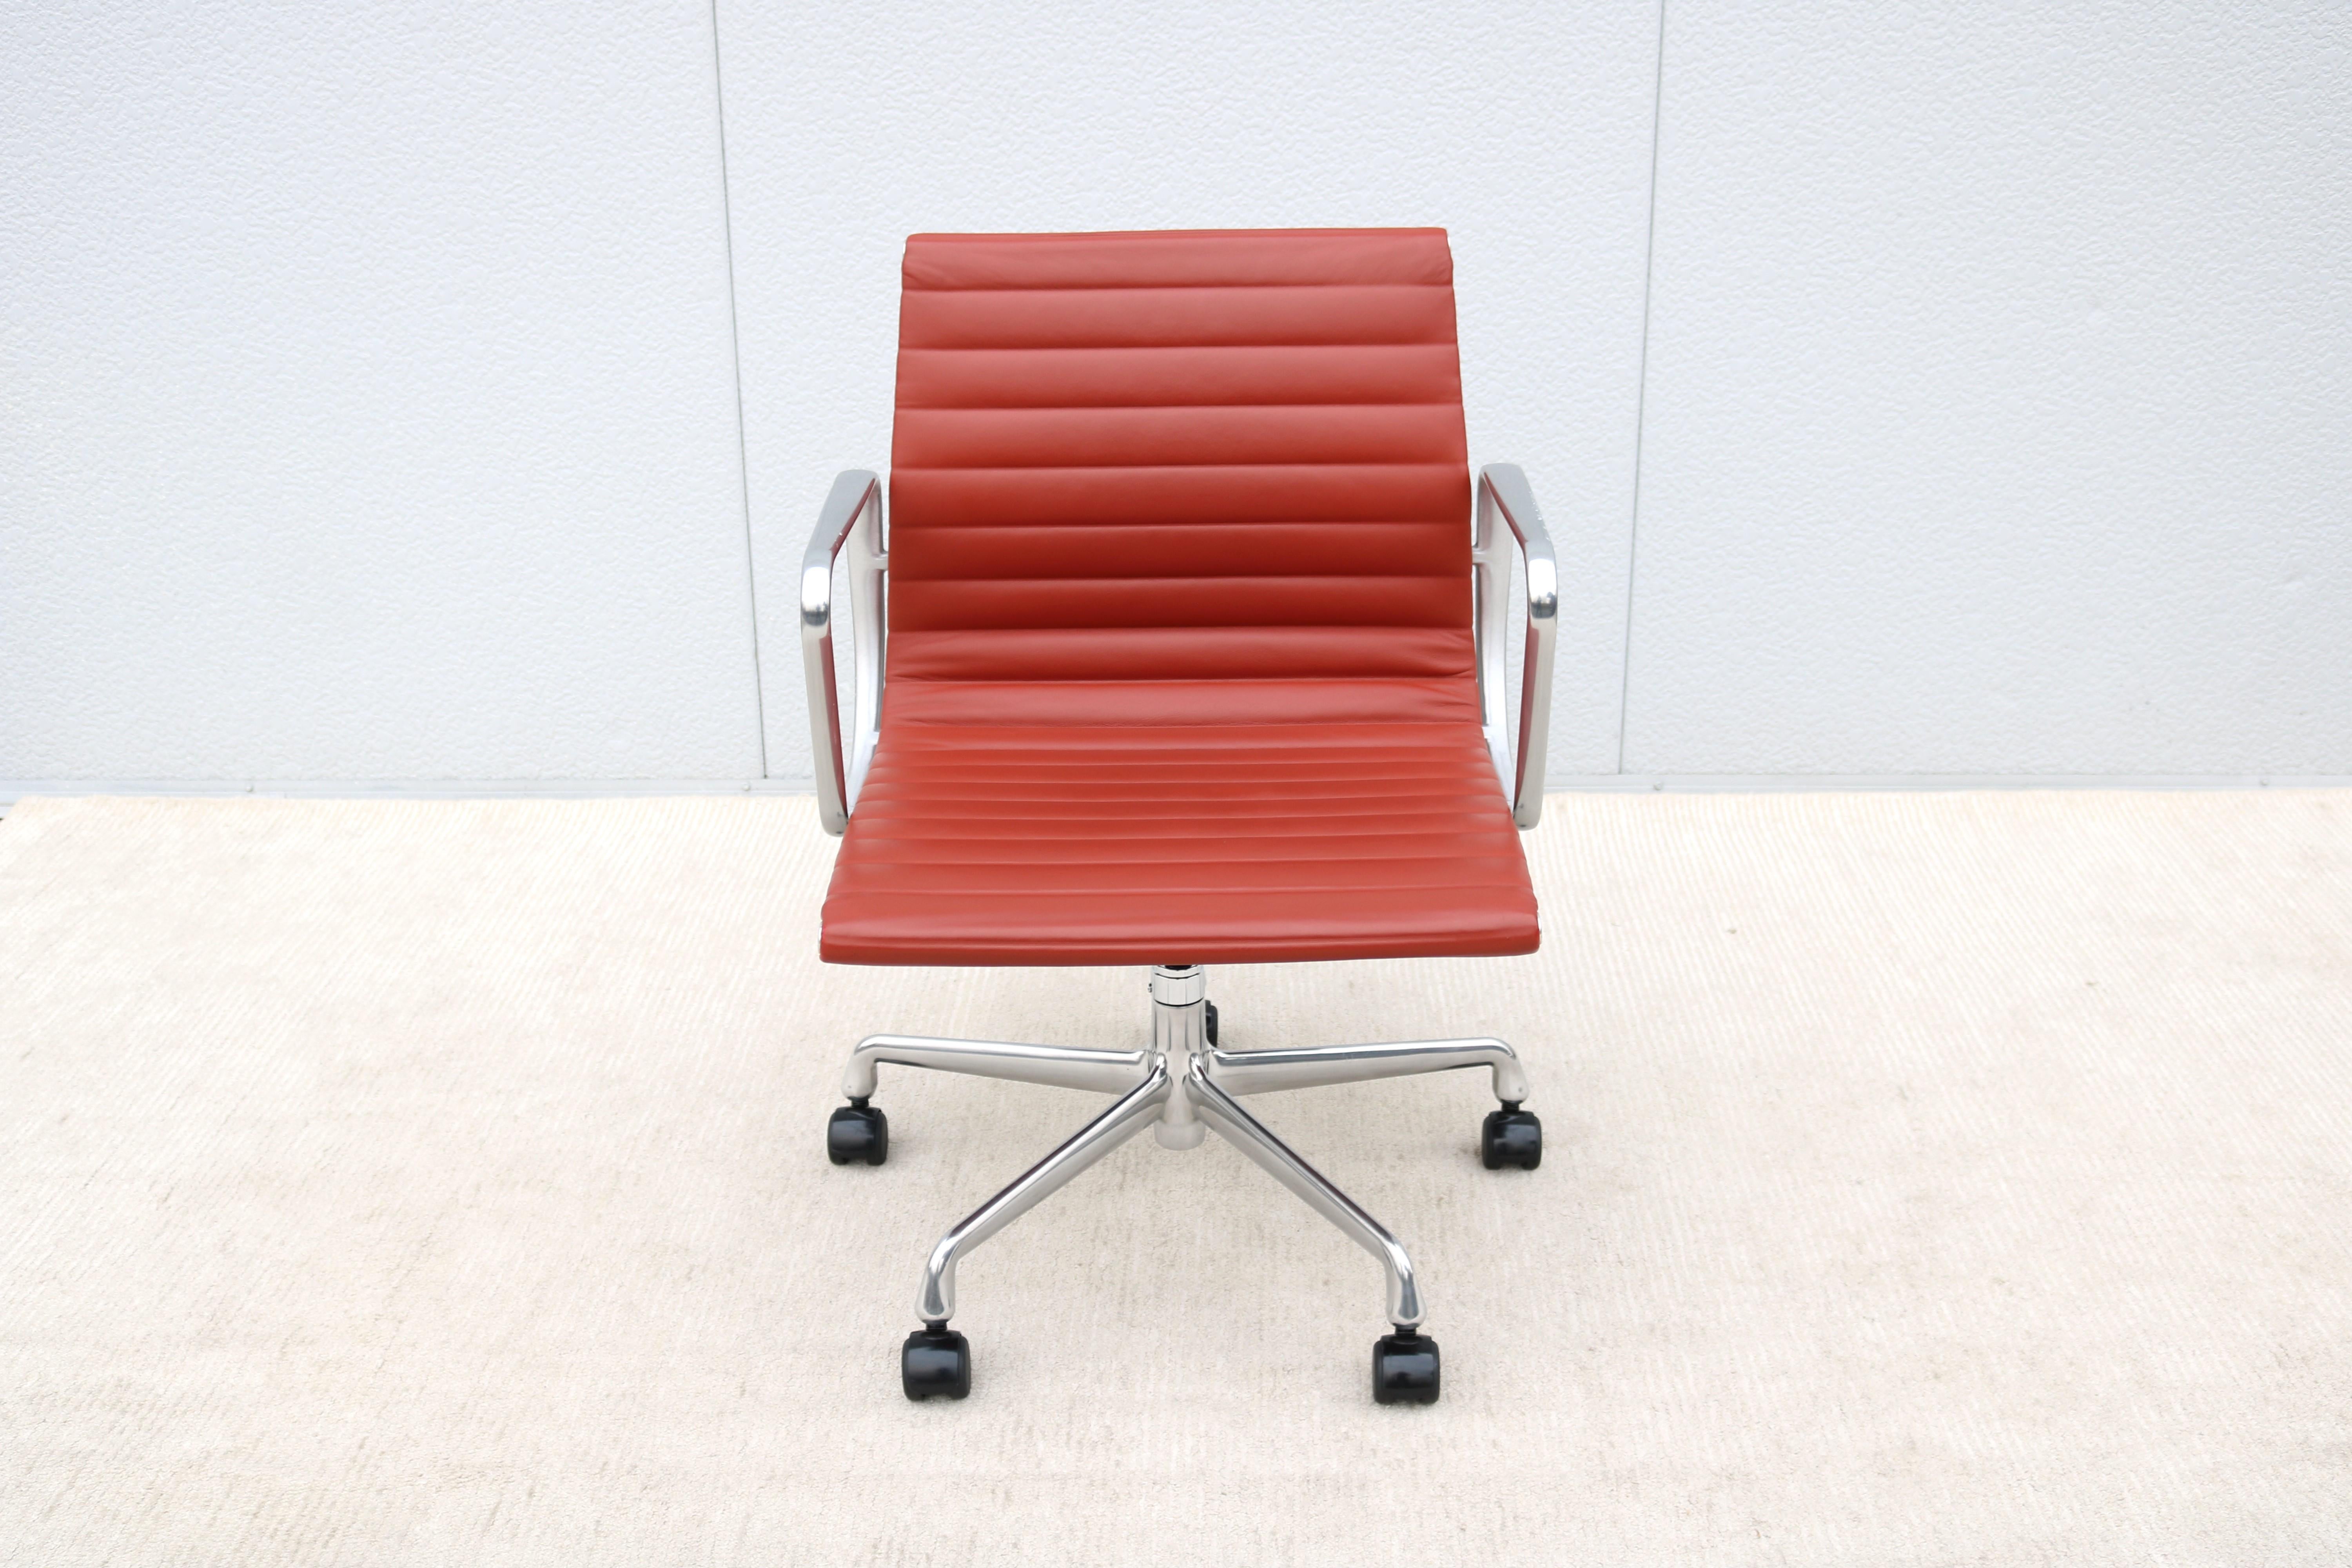 Stunning authentic mid-century modern Eames aluminum group management chair.
A timeless design classic and contemporary with innovative comfort features.
One of Herman Miller most popular chairs was designed in 1958 by Charles and Ray Eames.

Please